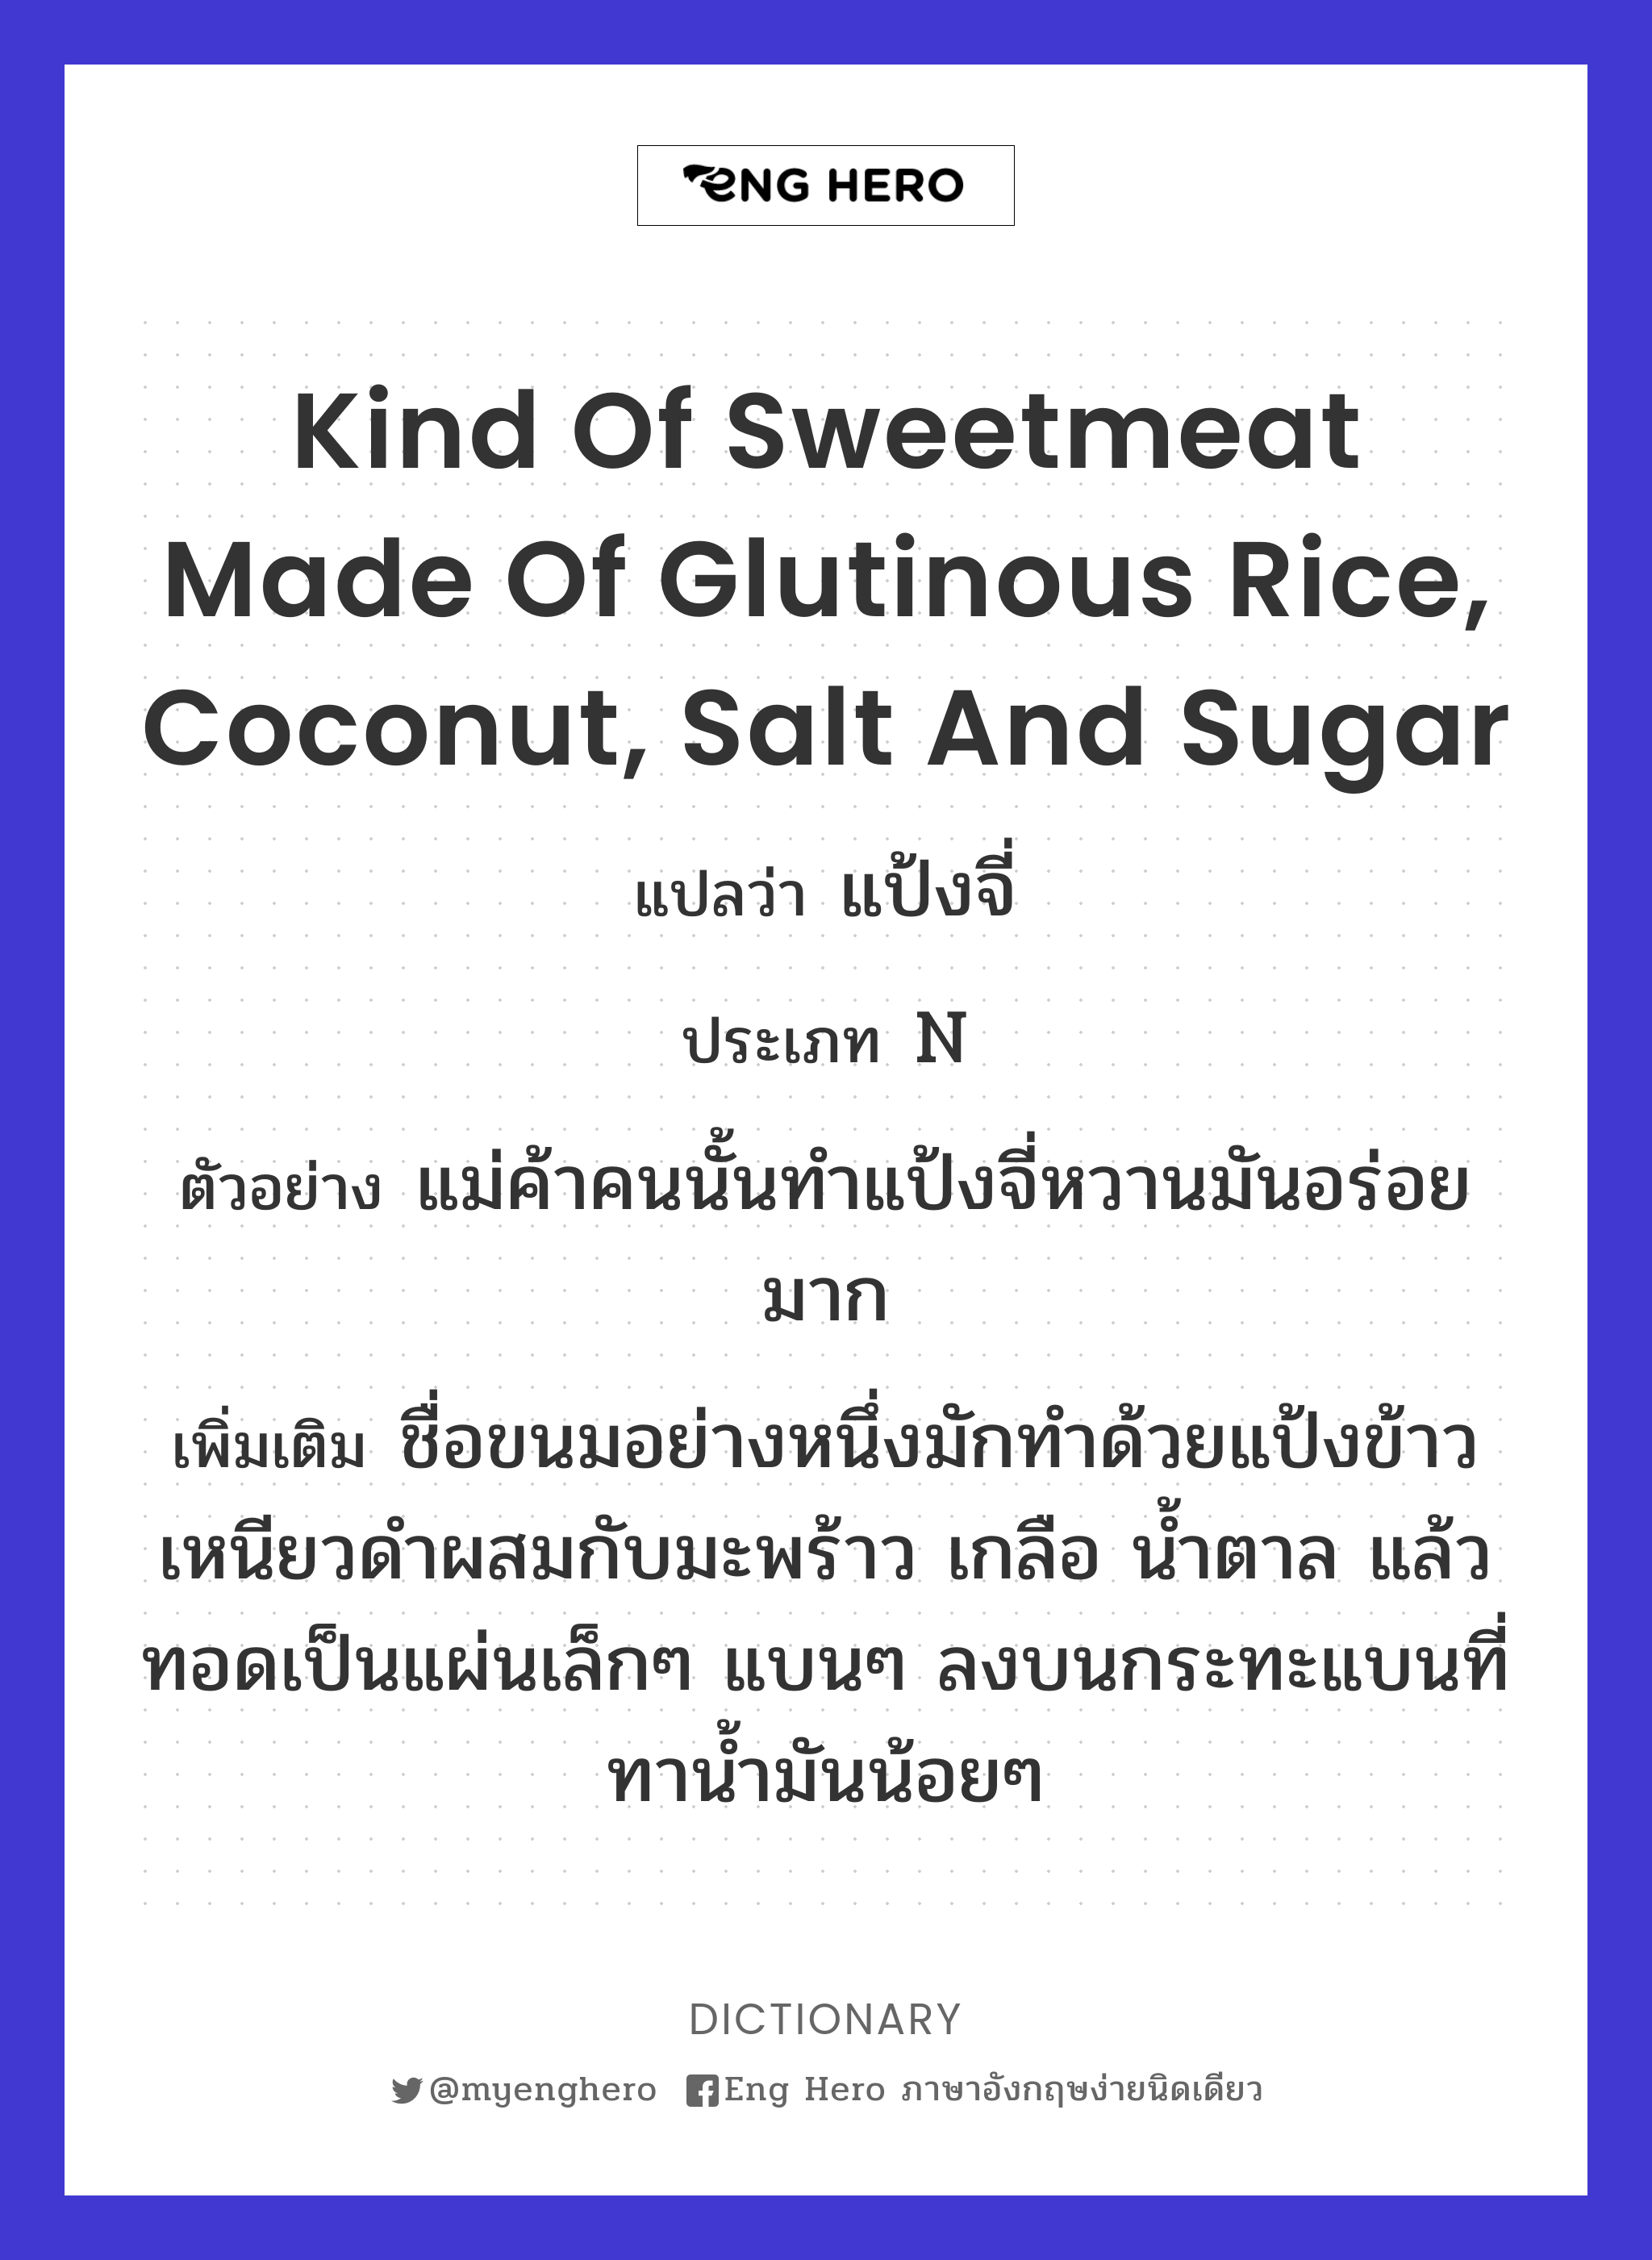 kind of sweetmeat made of glutinous rice, coconut, salt and sugar